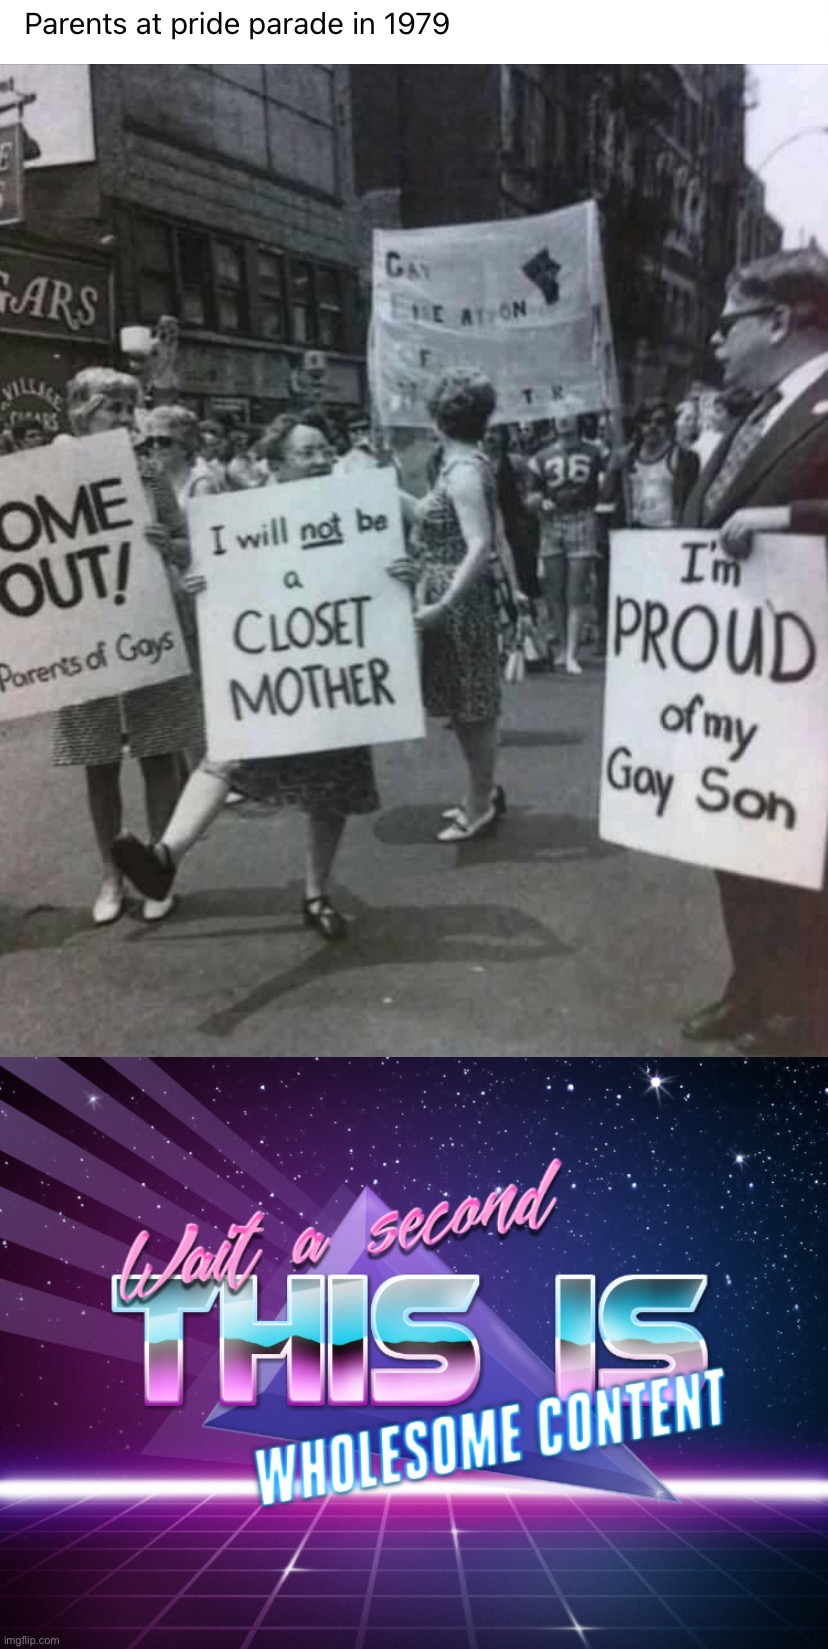 image tagged in pride parade 1979,wait a second this is wholesome content | made w/ Imgflip meme maker